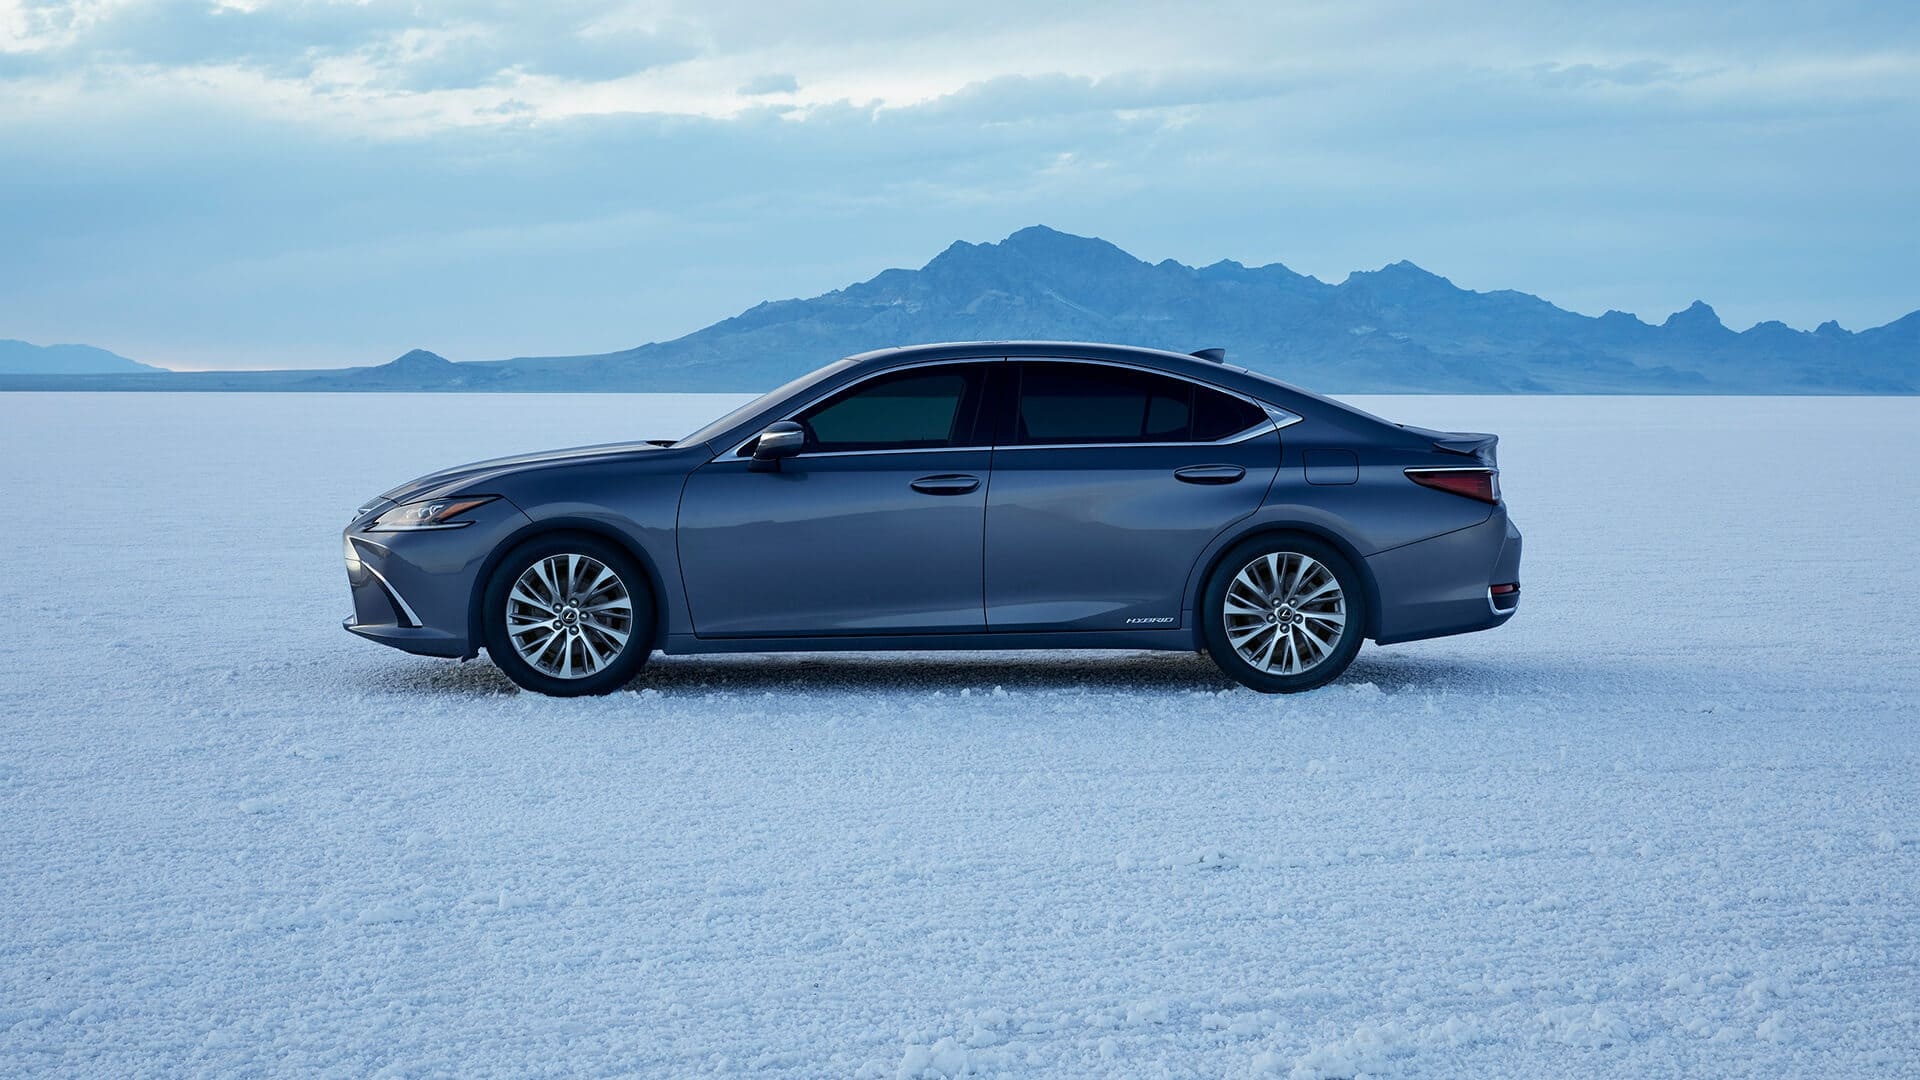 Lexus ES, Elegant and refined, Smooth and responsive, Advanced safety systems, 1920x1080 Full HD Desktop